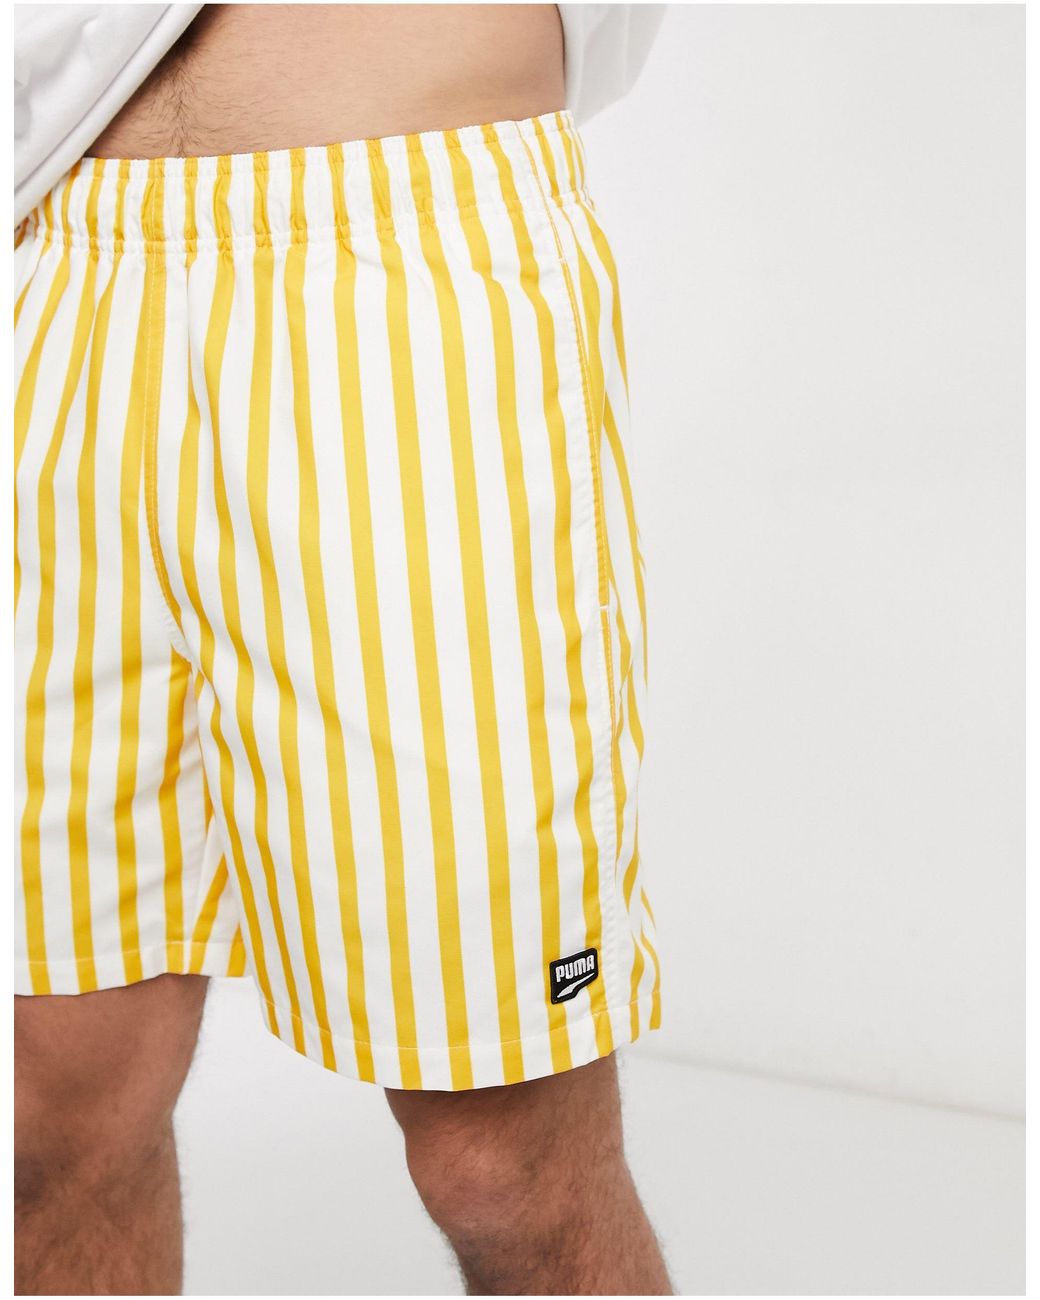 PUMA Downtown Striped Shorts in Yellow for Men - Lyst